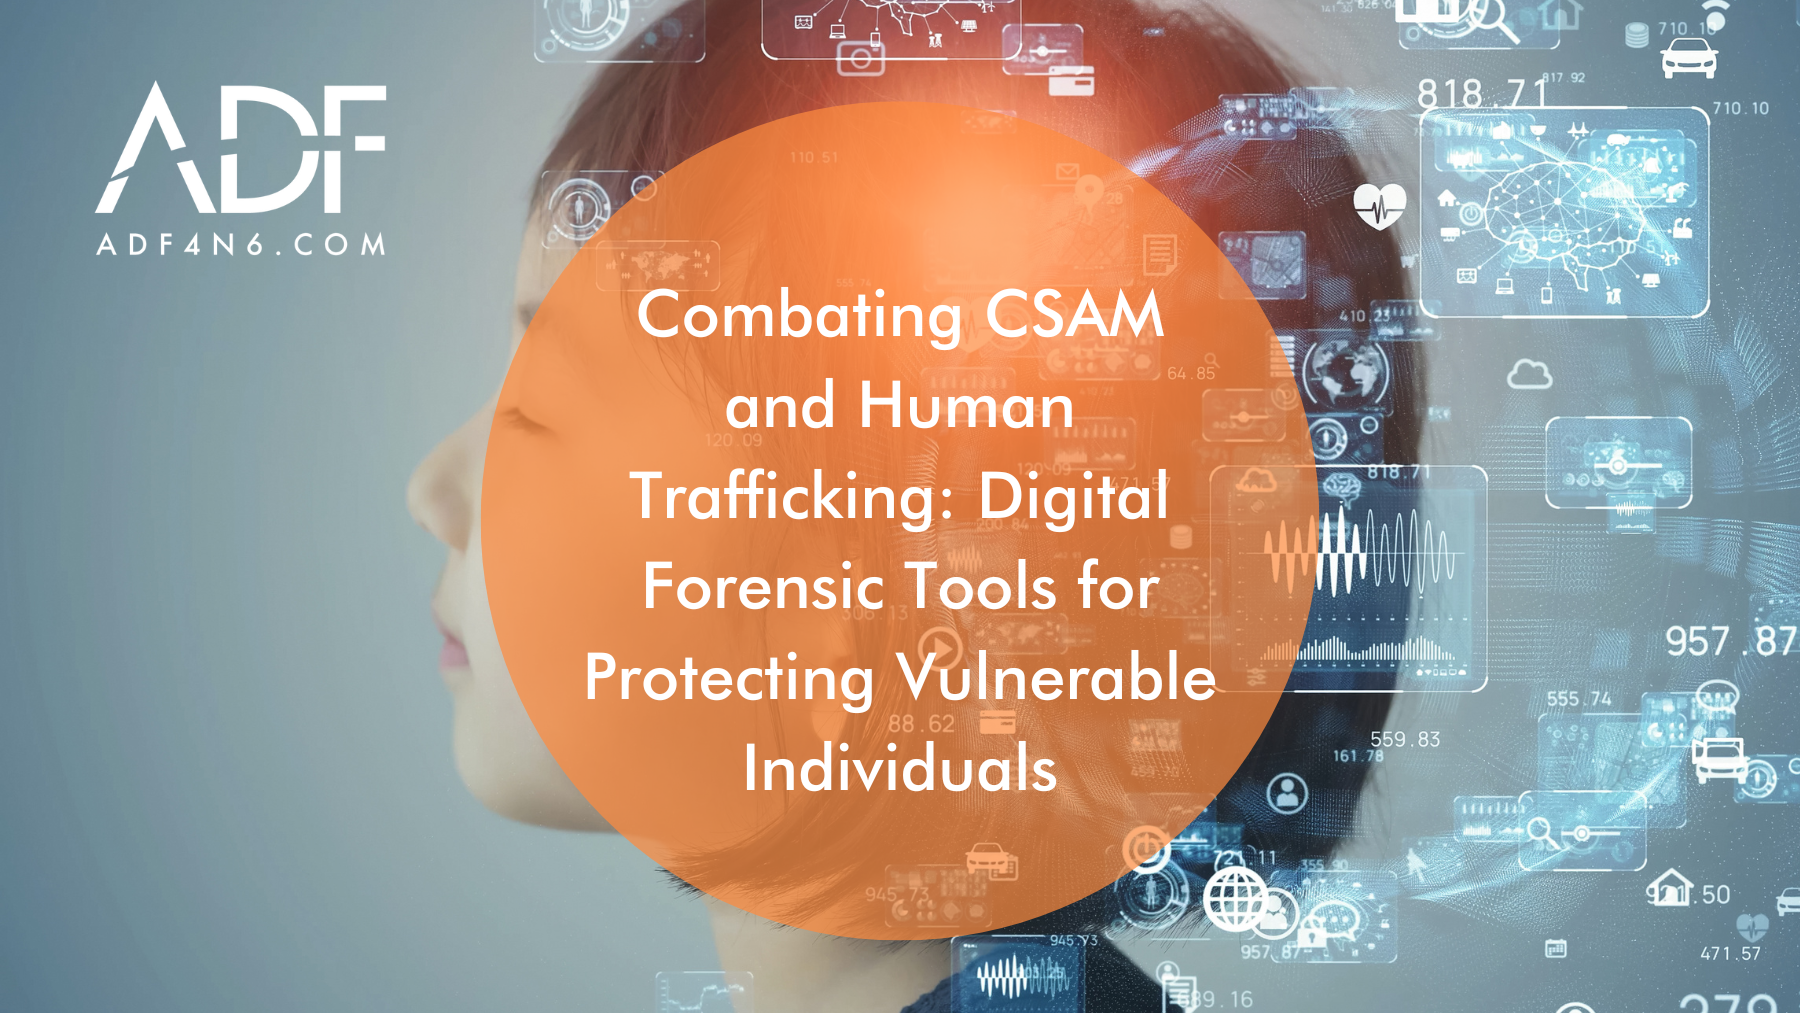 Combating CSAM and Human Trafficking: Digital Forensic Tools for Protecting Vulnerable Individuals